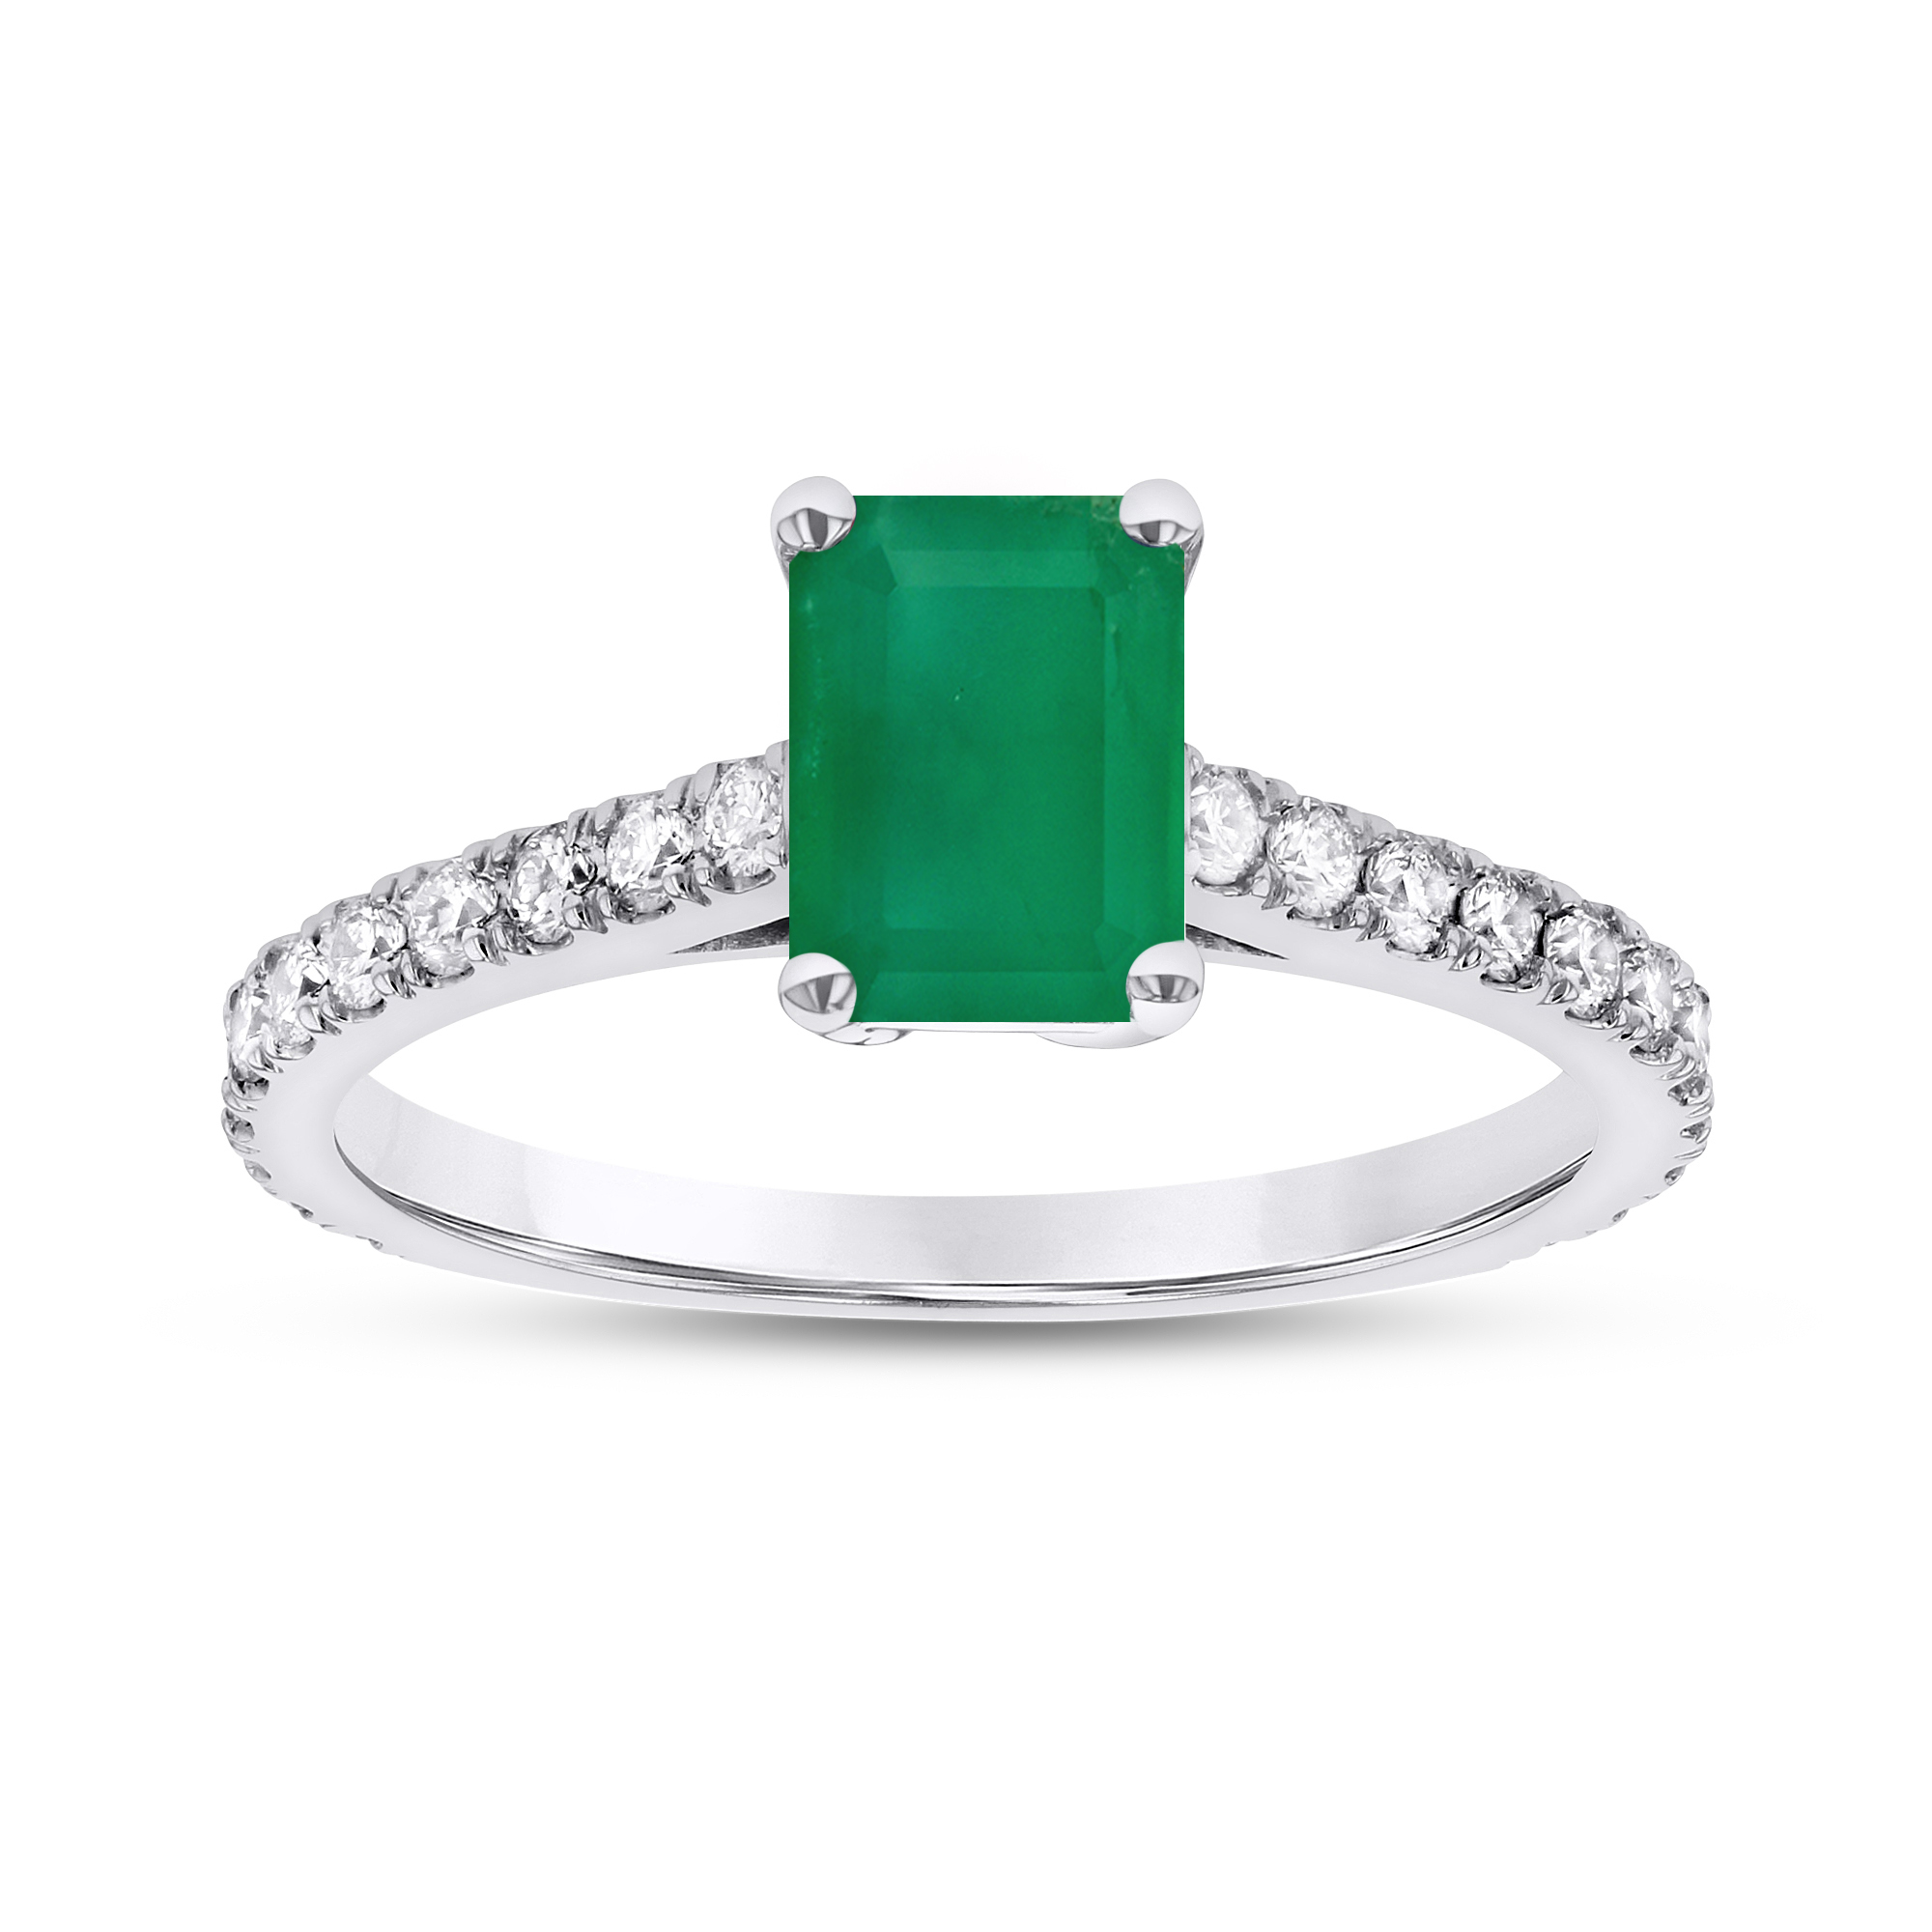 View 0.36ctw Diamond and Emerald Cut Emerald Engagement Ring in 14k White Gold